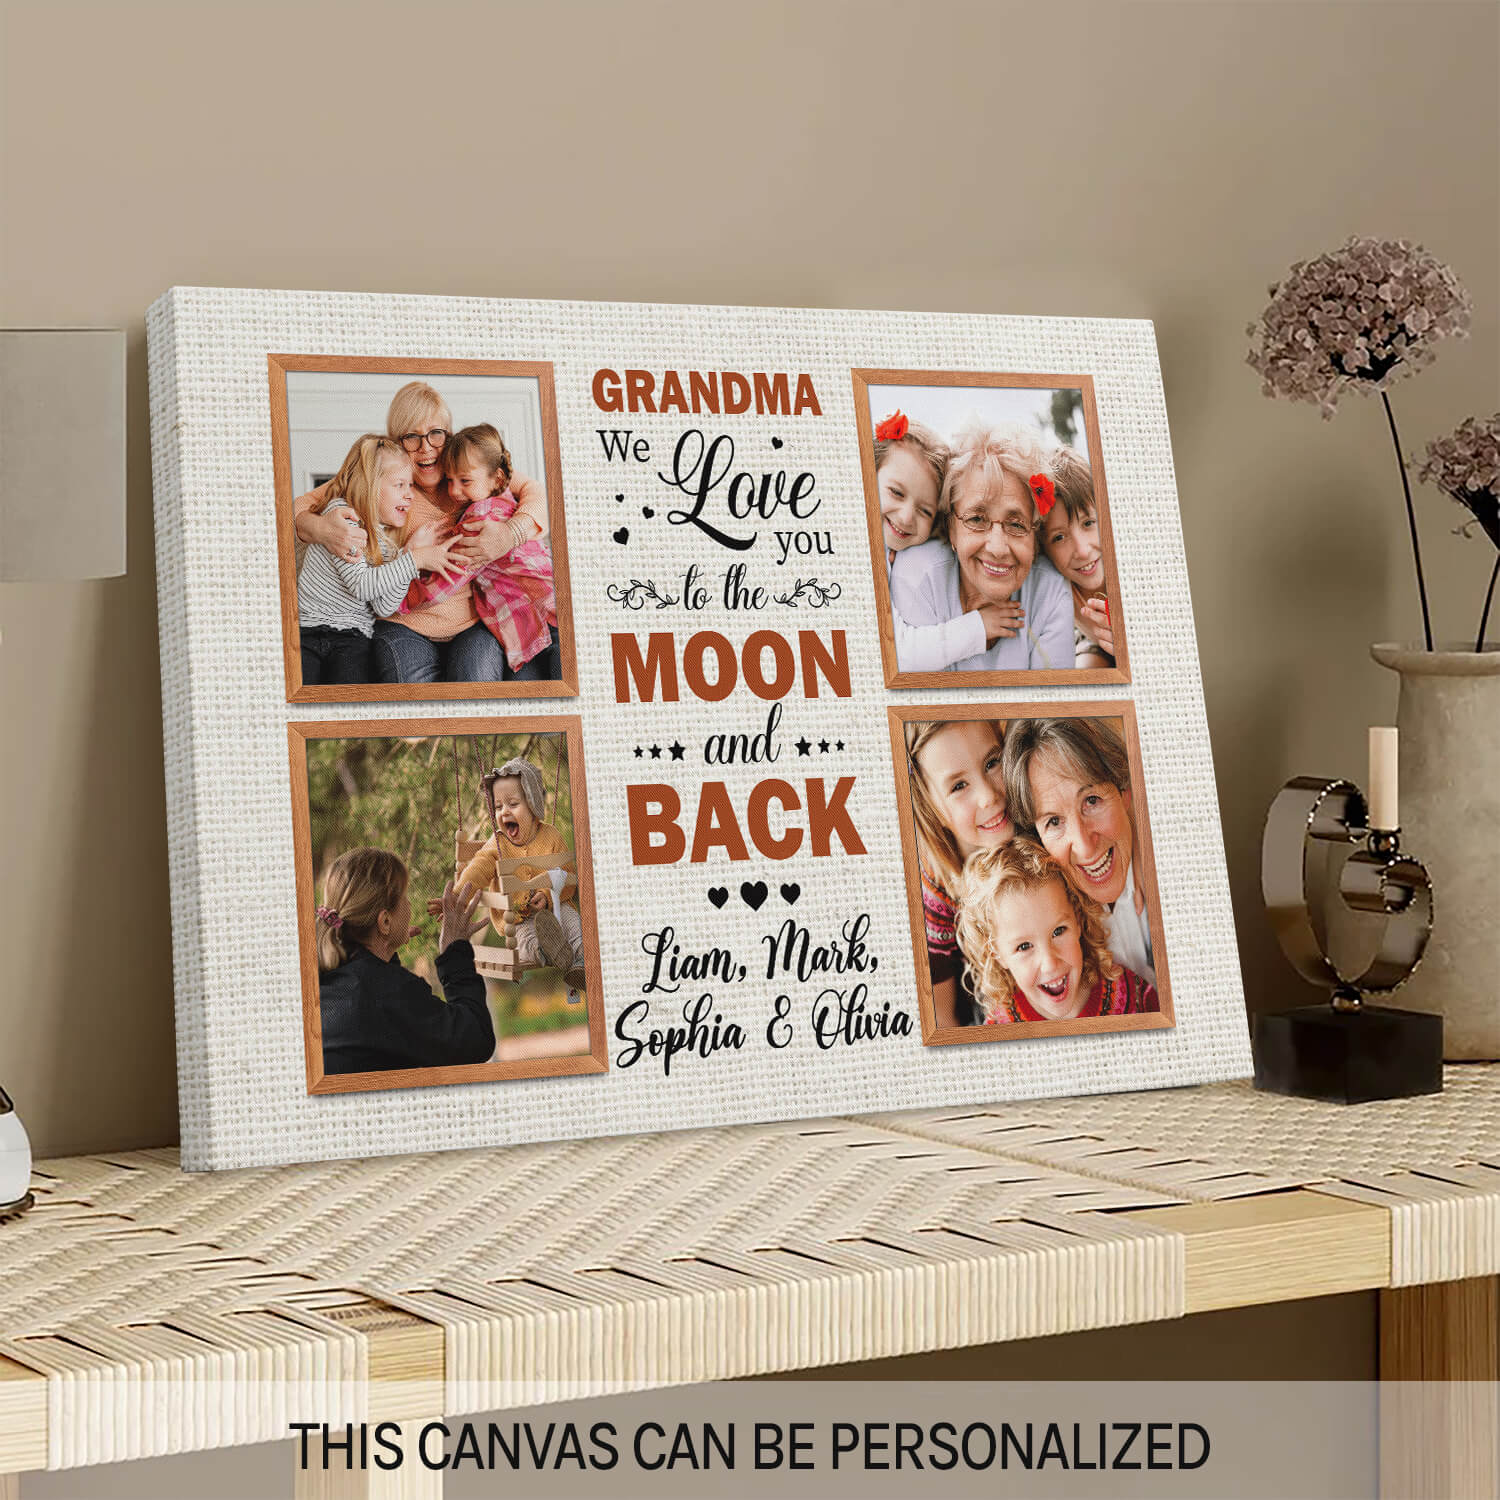 We love you to the moon and back - Personalized Mother's Day, Birthday gift for Grandma - Custom Canvas Print - MyMindfulGifts